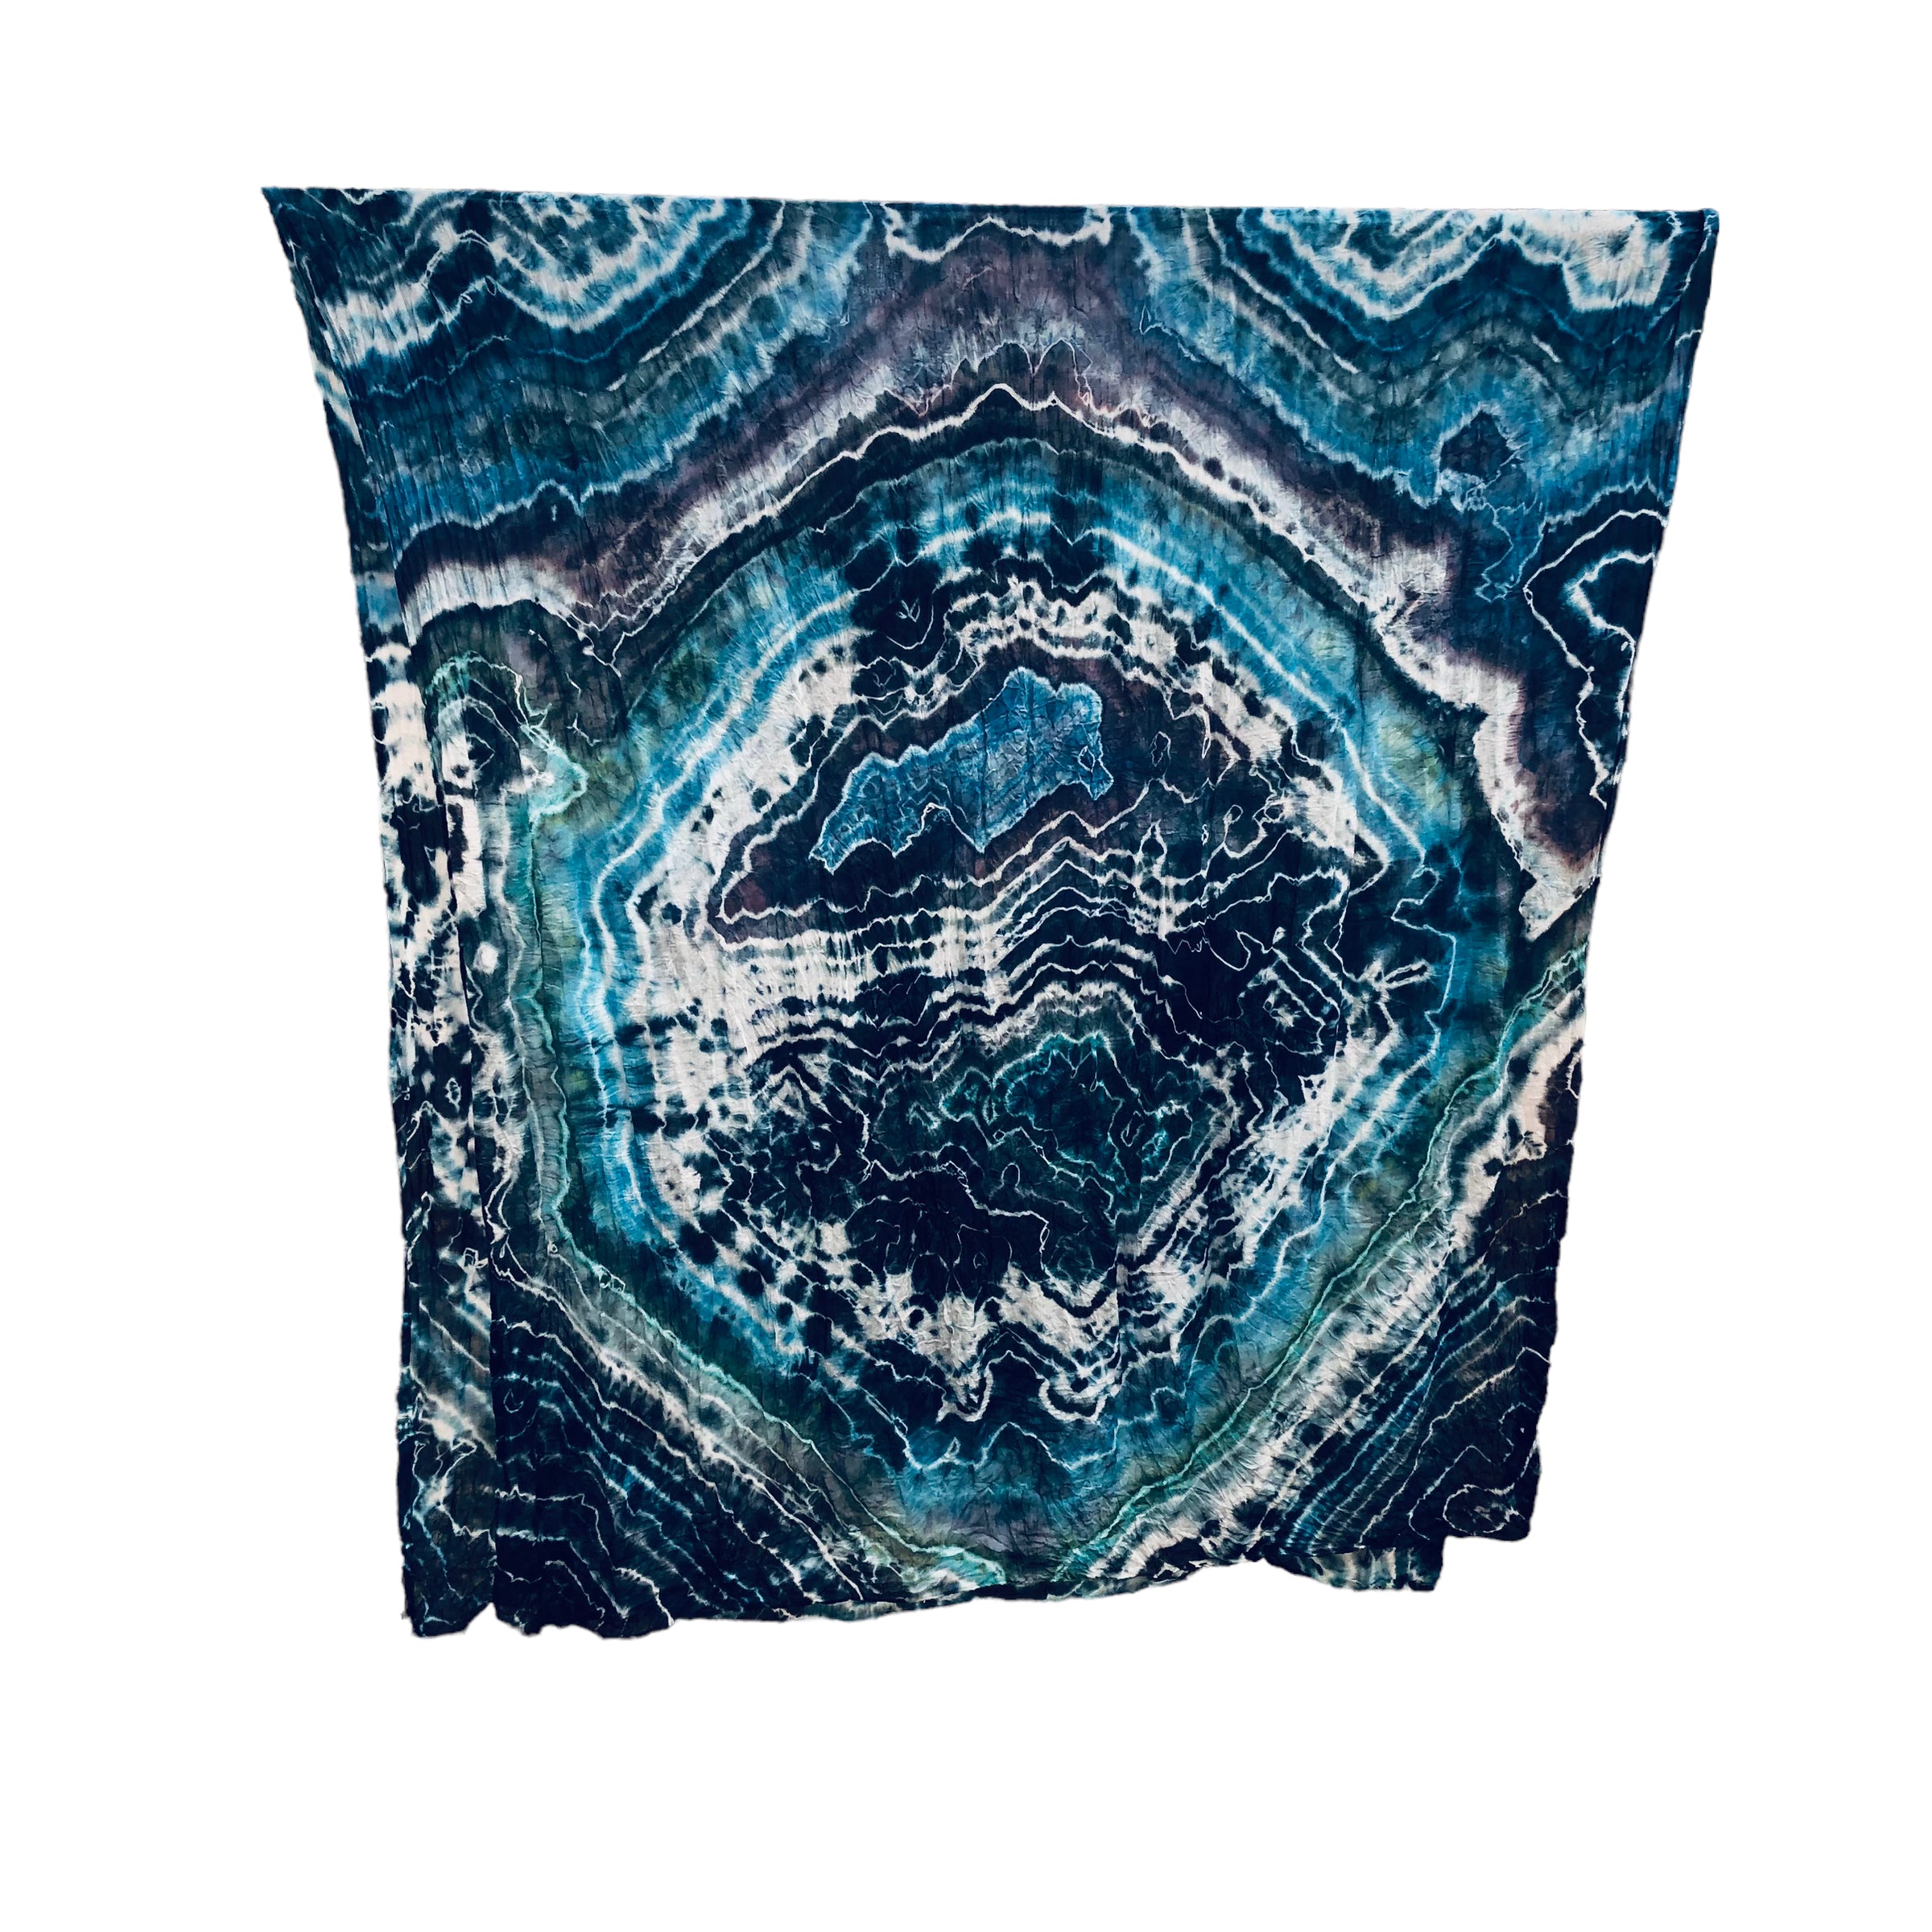 Geode Organic Cotton Mull Shawl - ice dyed couture, one of a kind